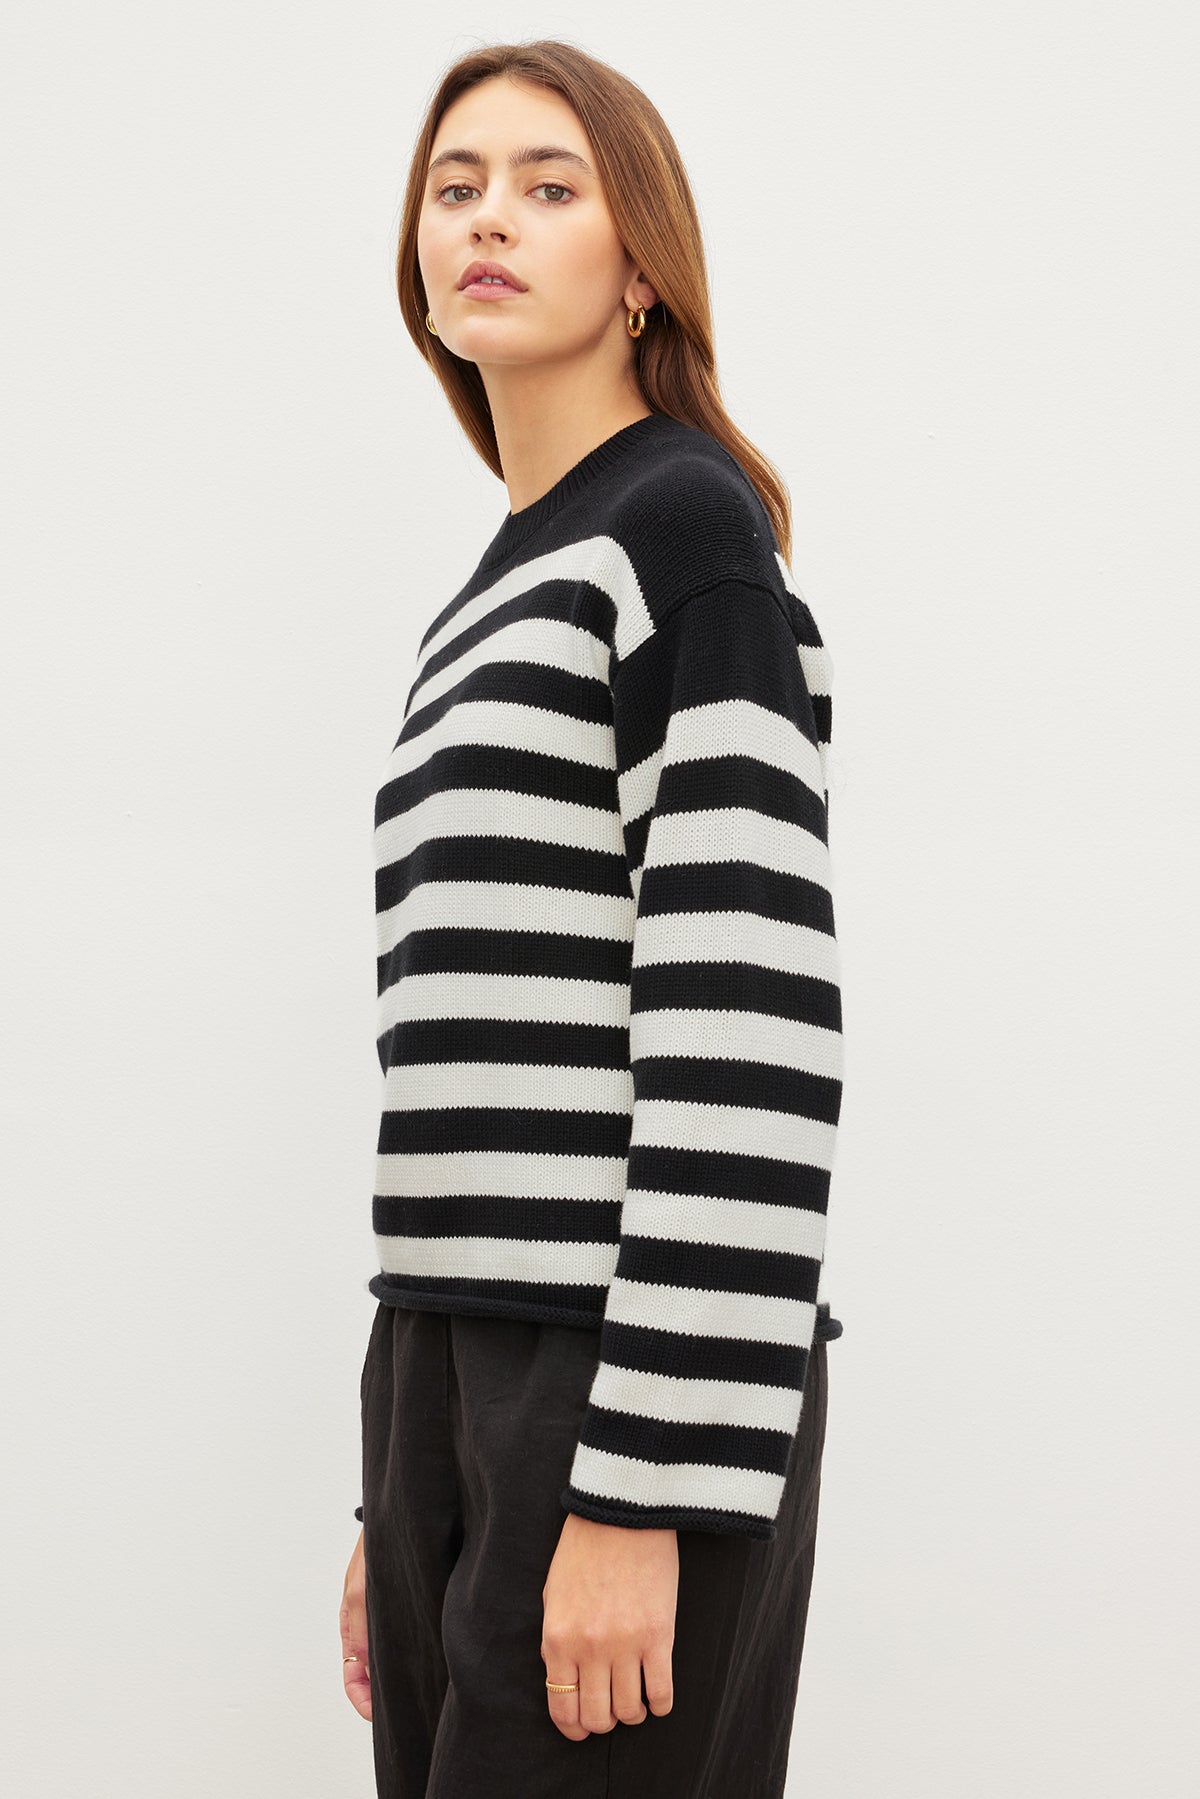 The model is wearing a LEX STRIPED CREW NECK SWEATER by Velvet by Graham & Spencer.-35967621857473